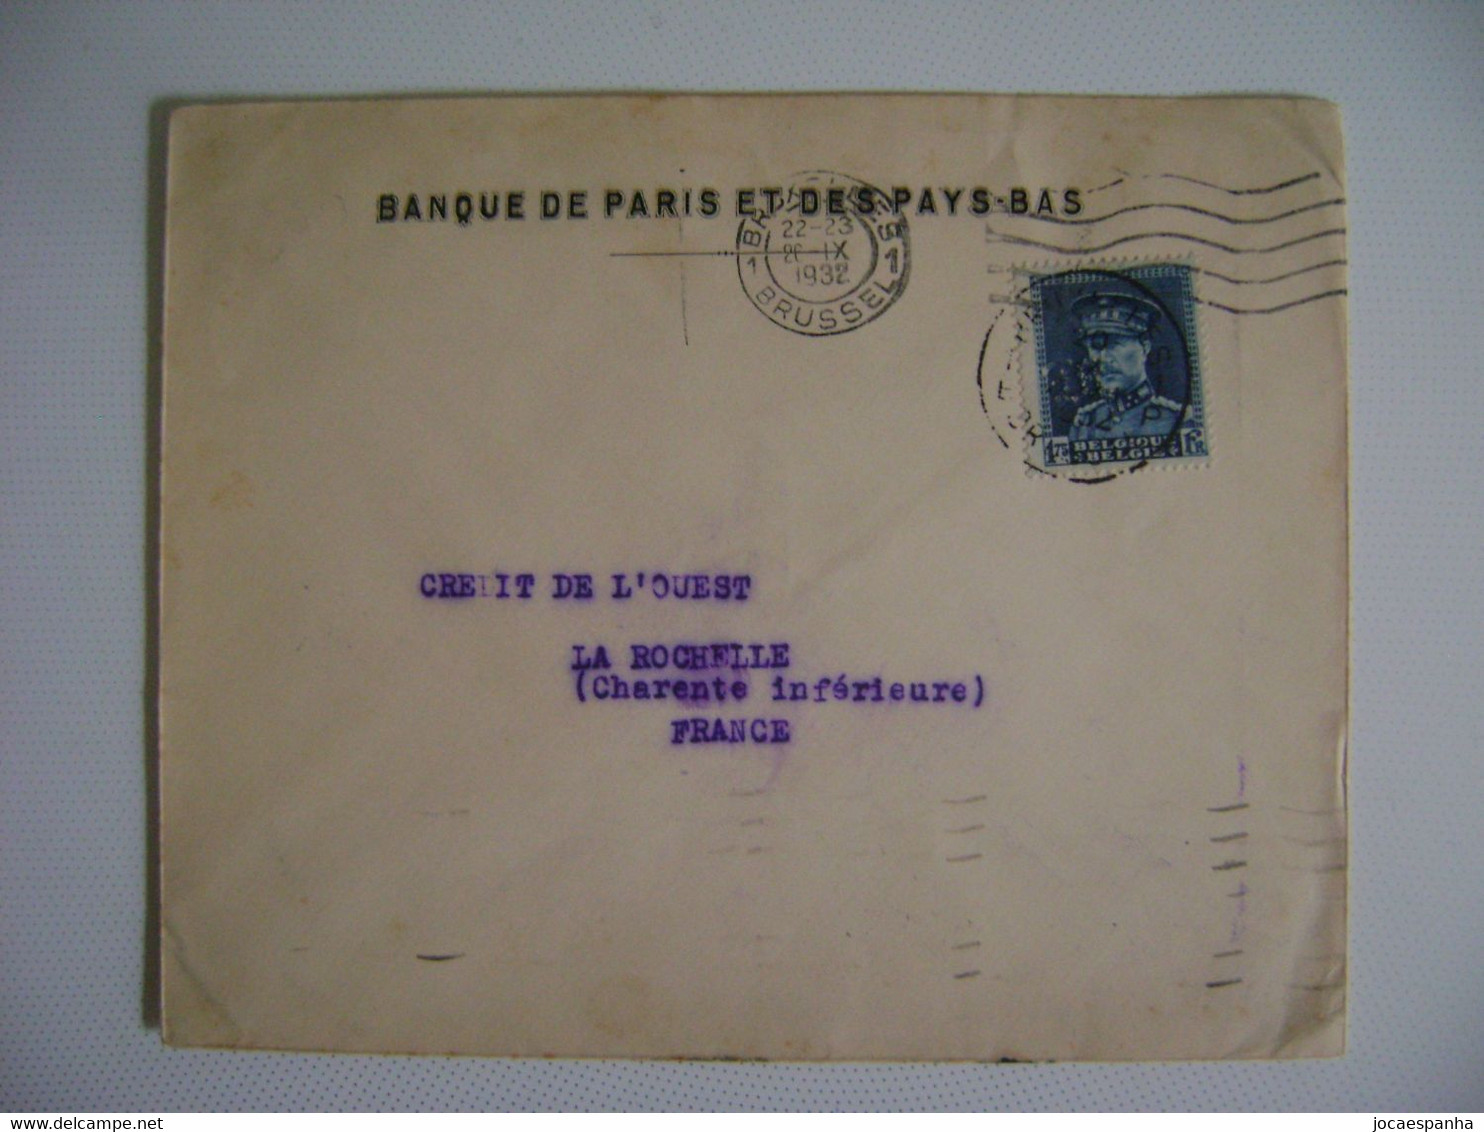 BELGIUM / BELGIQUE - ENVELOPE SENT FROM BRUSSELS / BRUXELLES TO LA ROCHELLE (FRANCE) IN 1932 IN THE STATE - 1909-34